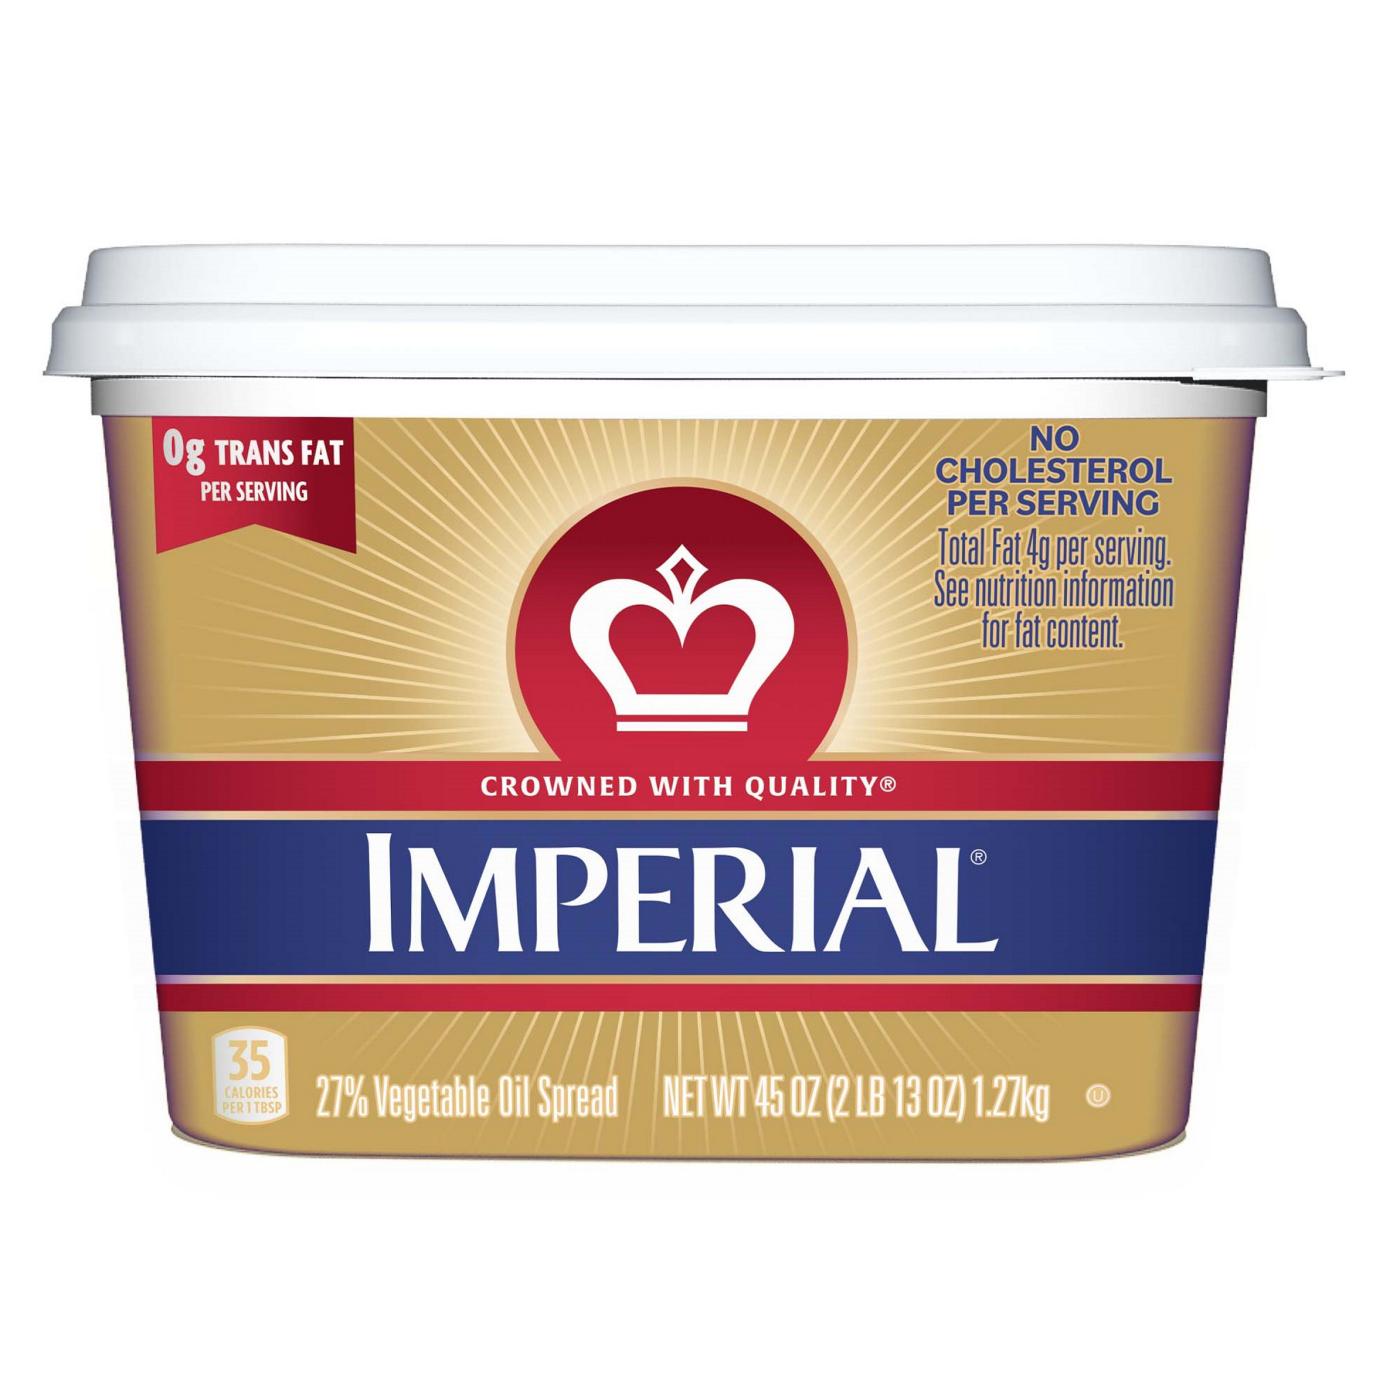 Imperial Vegetable Oil Spread; image 1 of 6